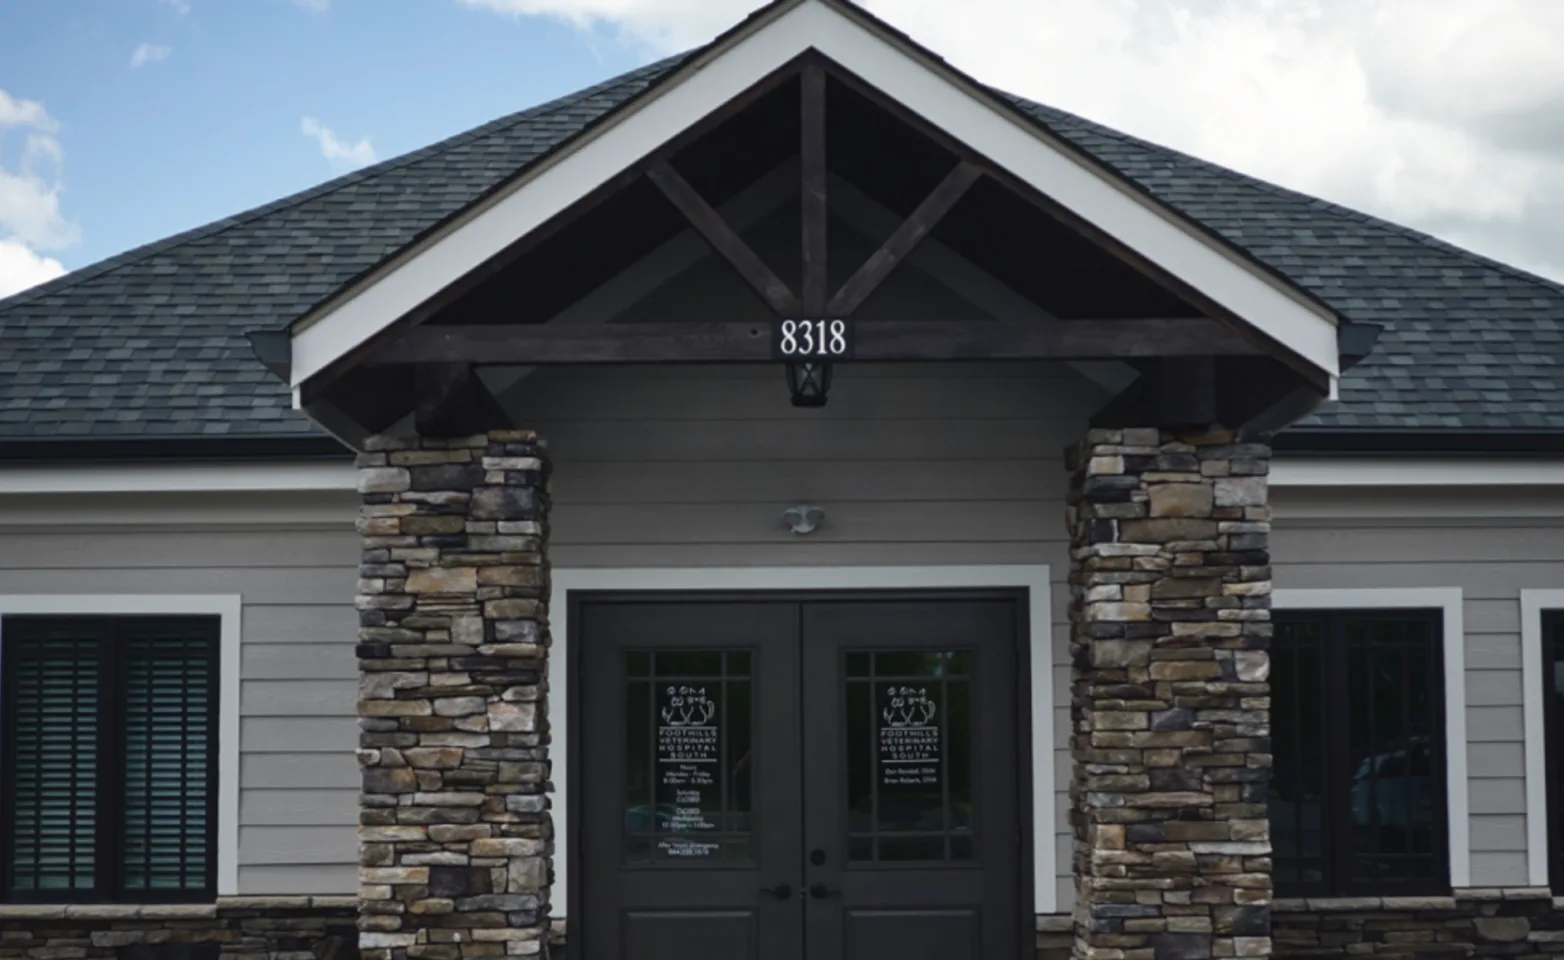 Foothills Veterinary Hospital South Front entrance building